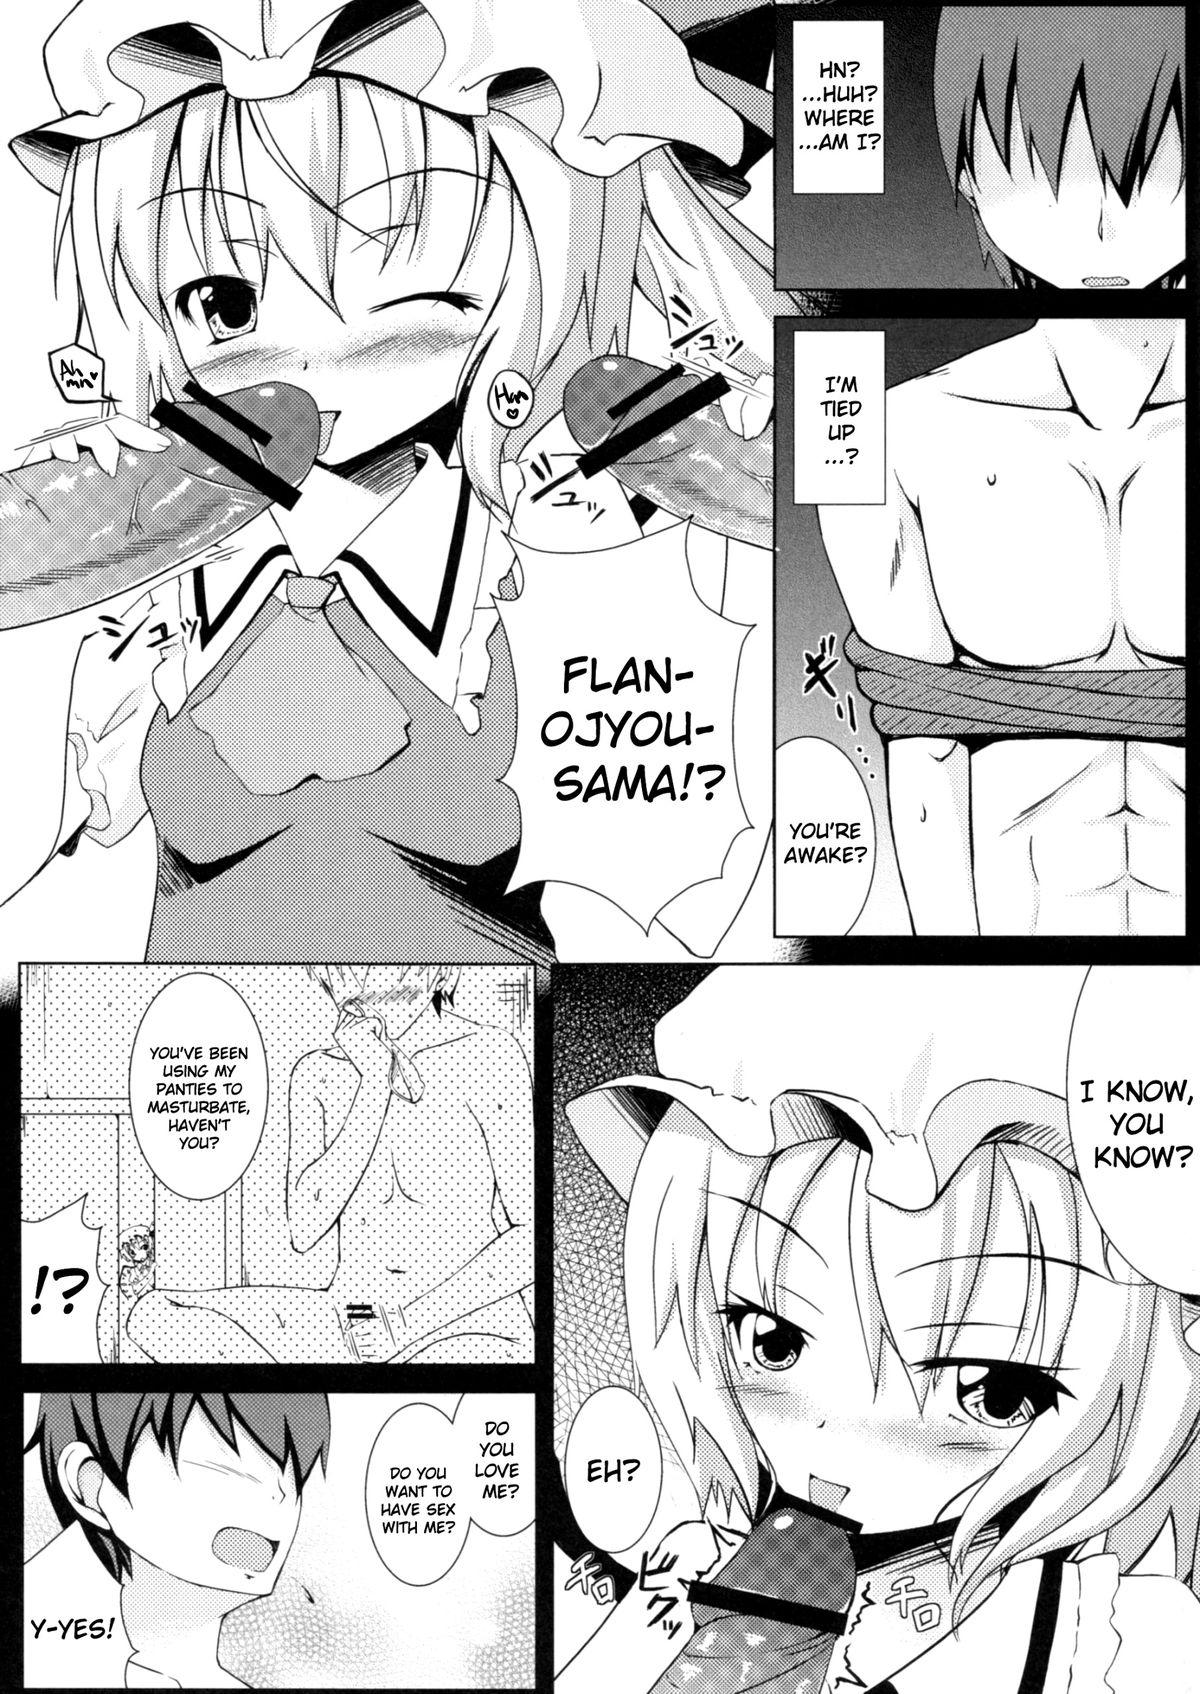 Hot Girl Fuck NTR Flan-chan - Touhou project Family Taboo - Page 2